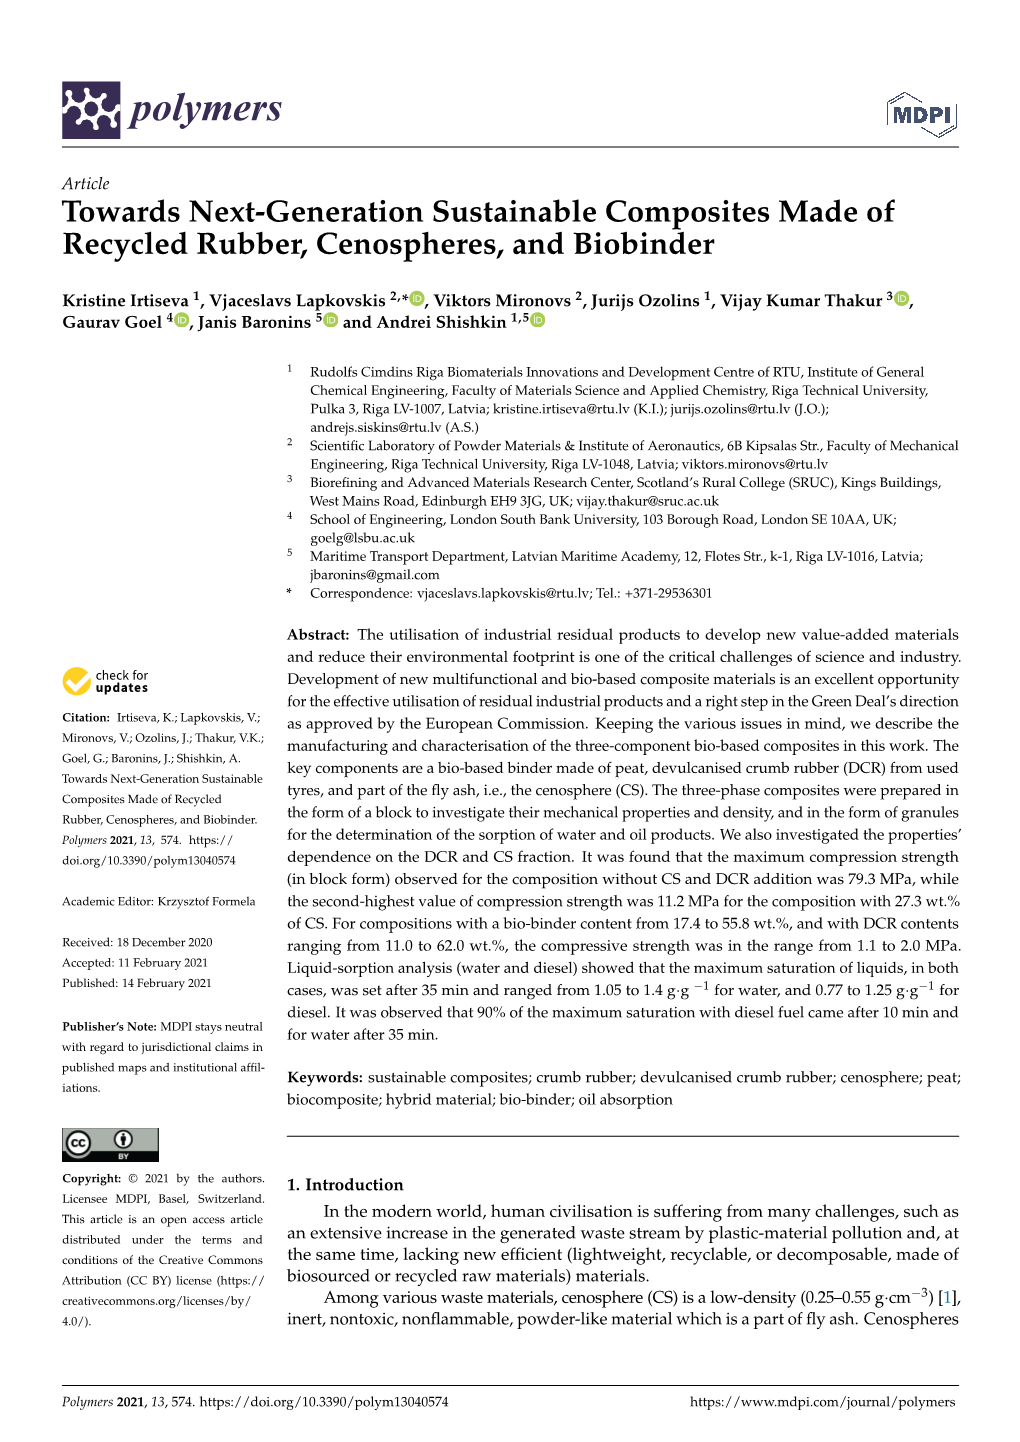 Towards Next-Generation Sustainable Composites Made of Recycled Rubber, Cenospheres, and Biobinder